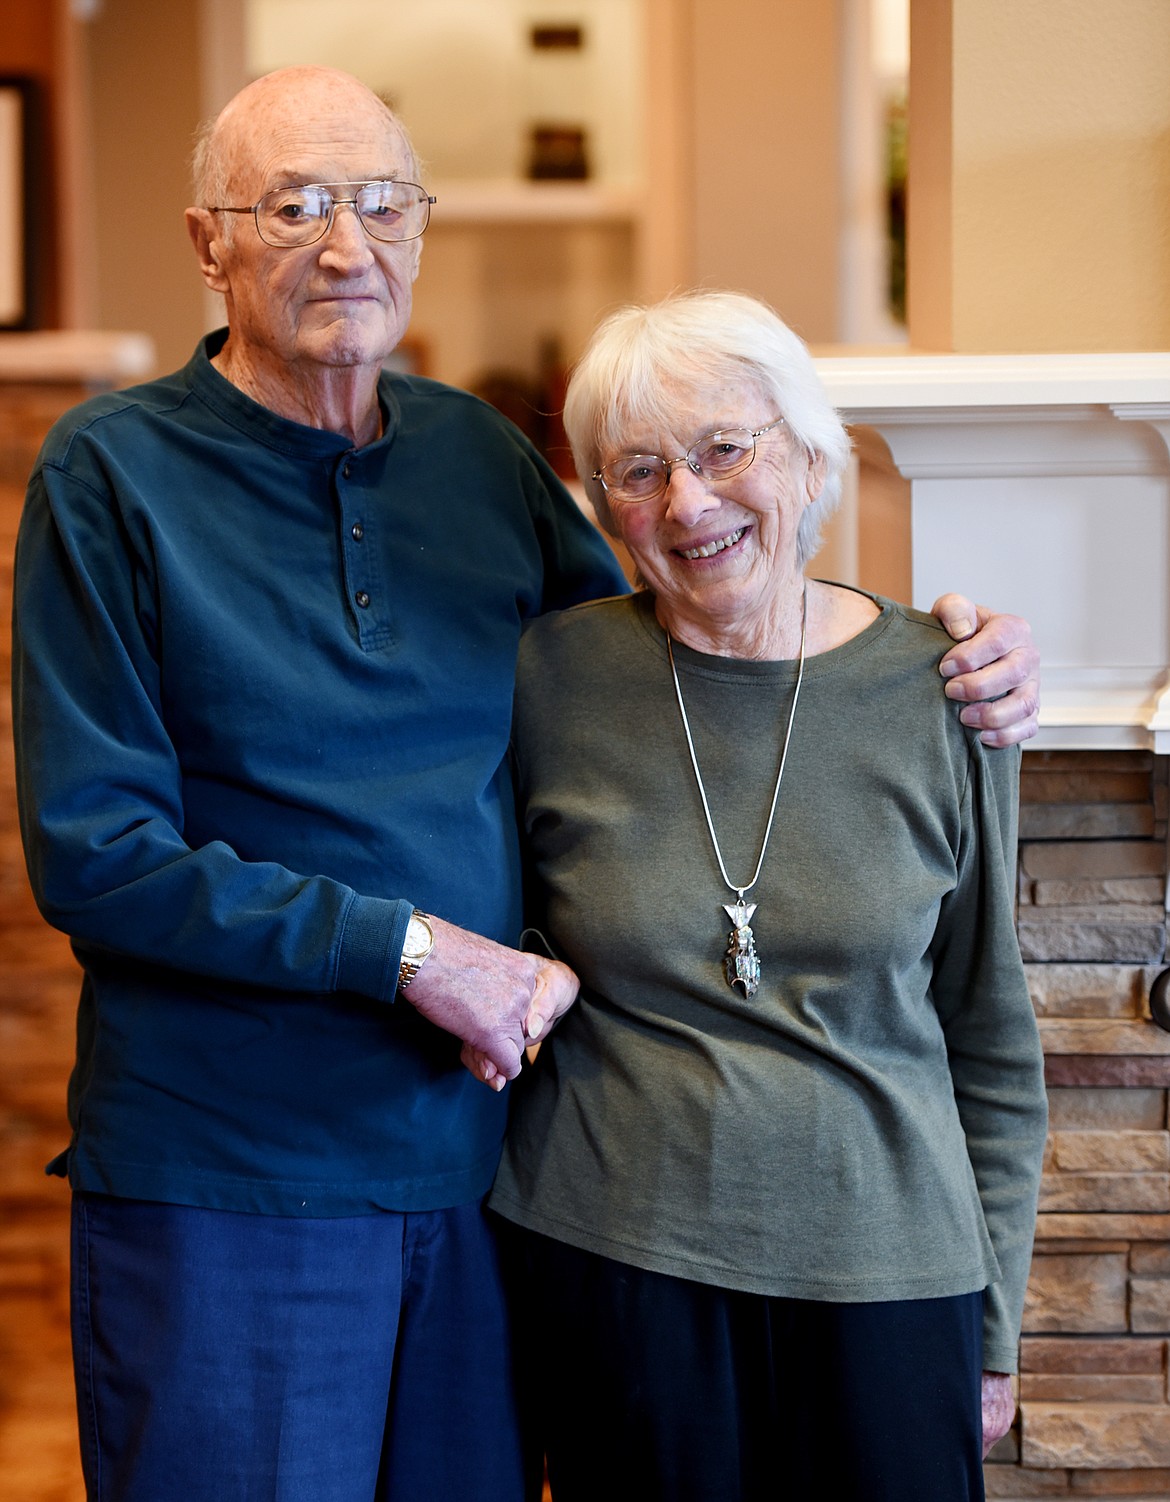 Bill and Lois McClaren have lived in the Flathead for more than 60 years and were involved in the beginning of Flathead Valley Community College. Bill was the first dean of students at the college in 1967. (Brenda Ahearn/Daily Inter Lake)